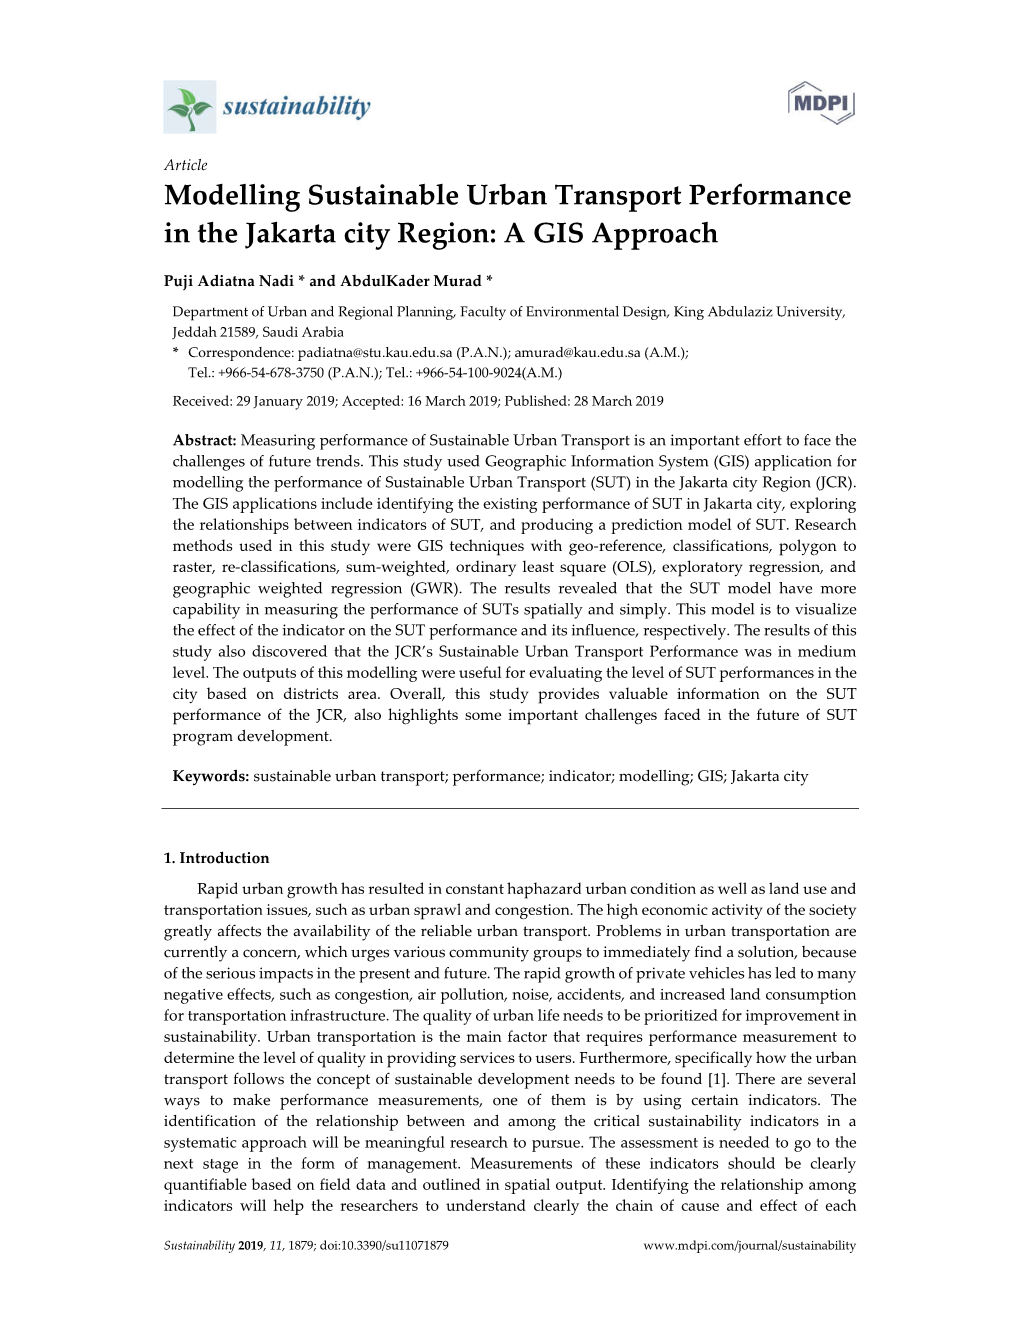 Modelling Sustainable Urban Transport Performance in the Jakarta City Region: a GIS Approach